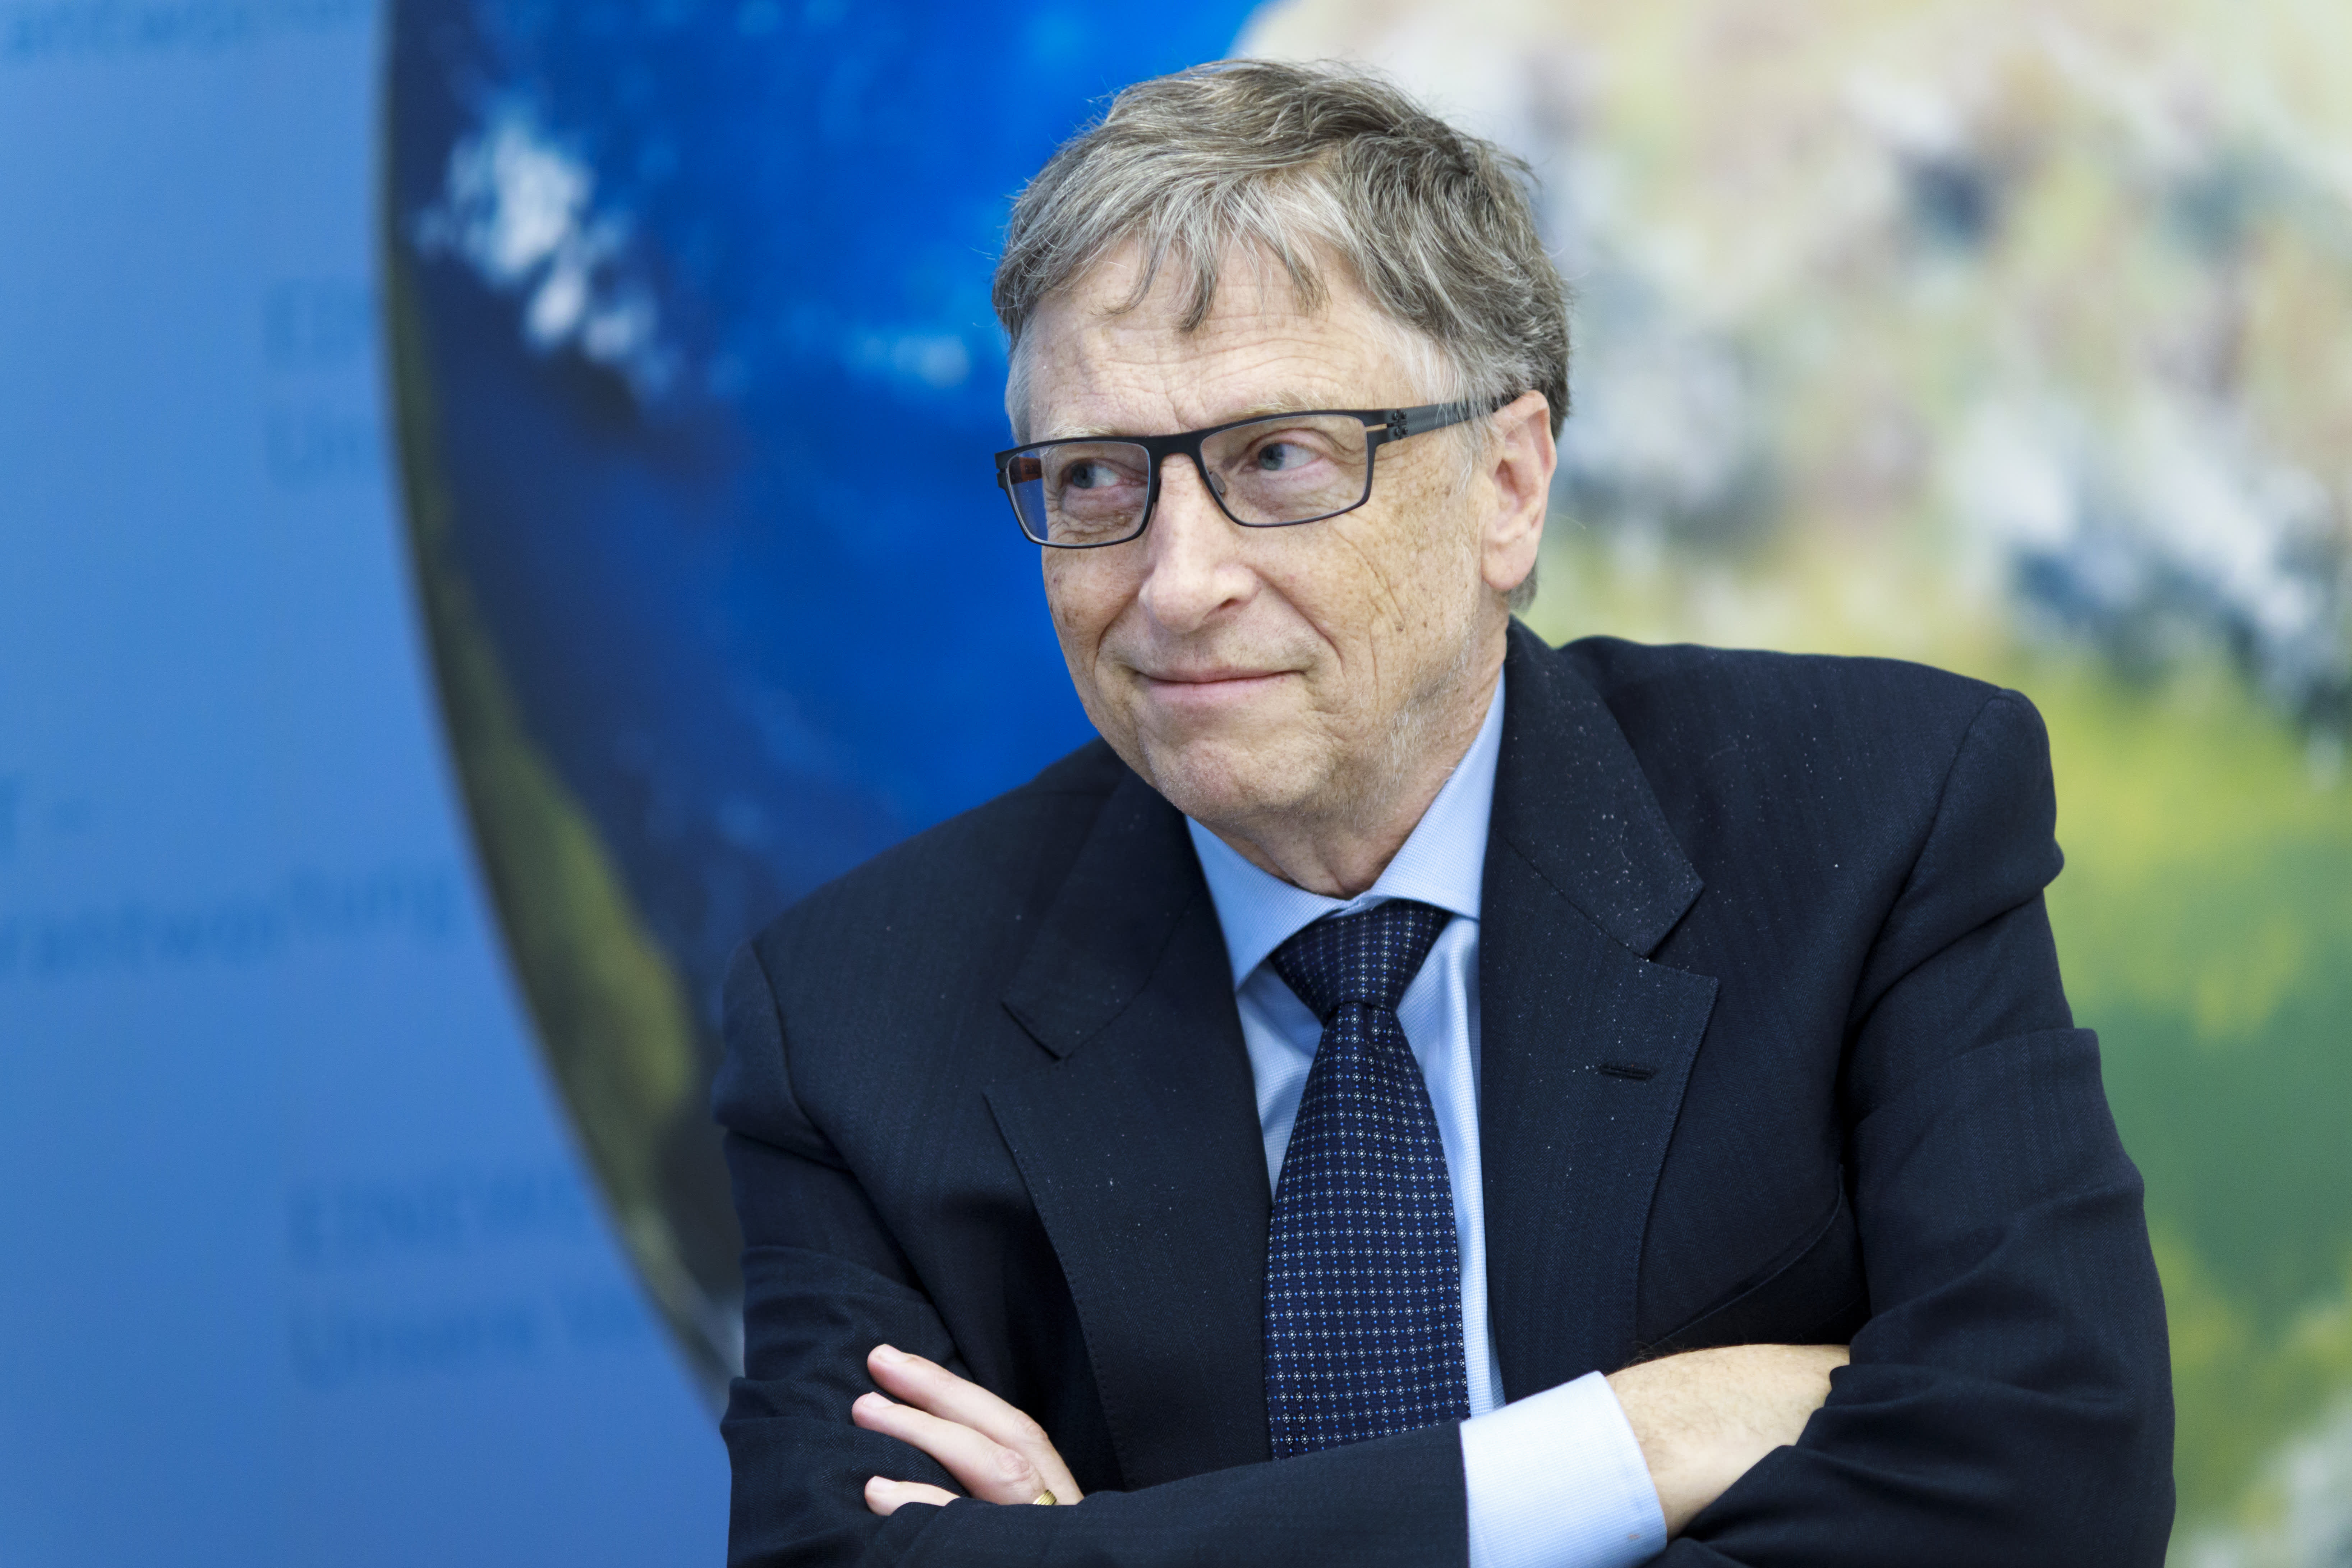 Bill Gates: This book 'was so compelling, I couldn't turn away'—and 4